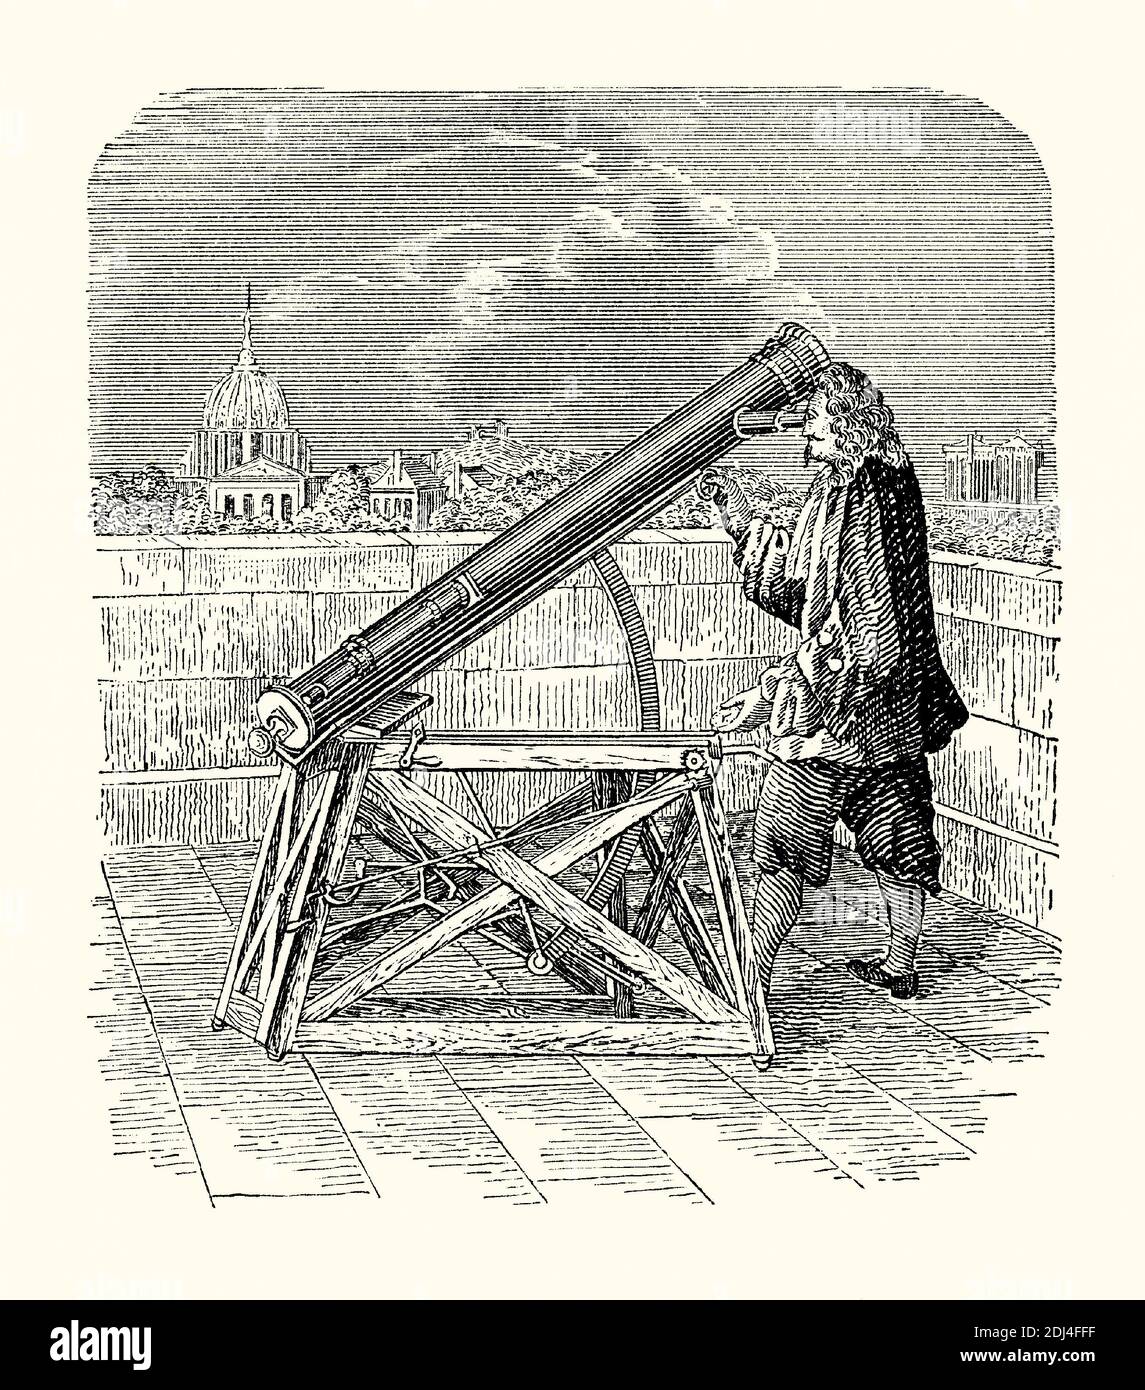 An old engraving showing Isaac Newton and his reflecting telescope, London, England, UK c. 1670. It is from a Victorian mechanical engineering book of the 1880s. The Newtonian telescope, also called the Newtonian reflector or just the Newtonian, is a type of reflecting telescope invented by the English scientist Sir Isaac Newton (1642–1727), using a concave primary mirror and a flat diagonal secondary mirror. Newton's first reflecting telescope was completed in 1668 and is the earliest known functional reflecting telescope. Stock Photo